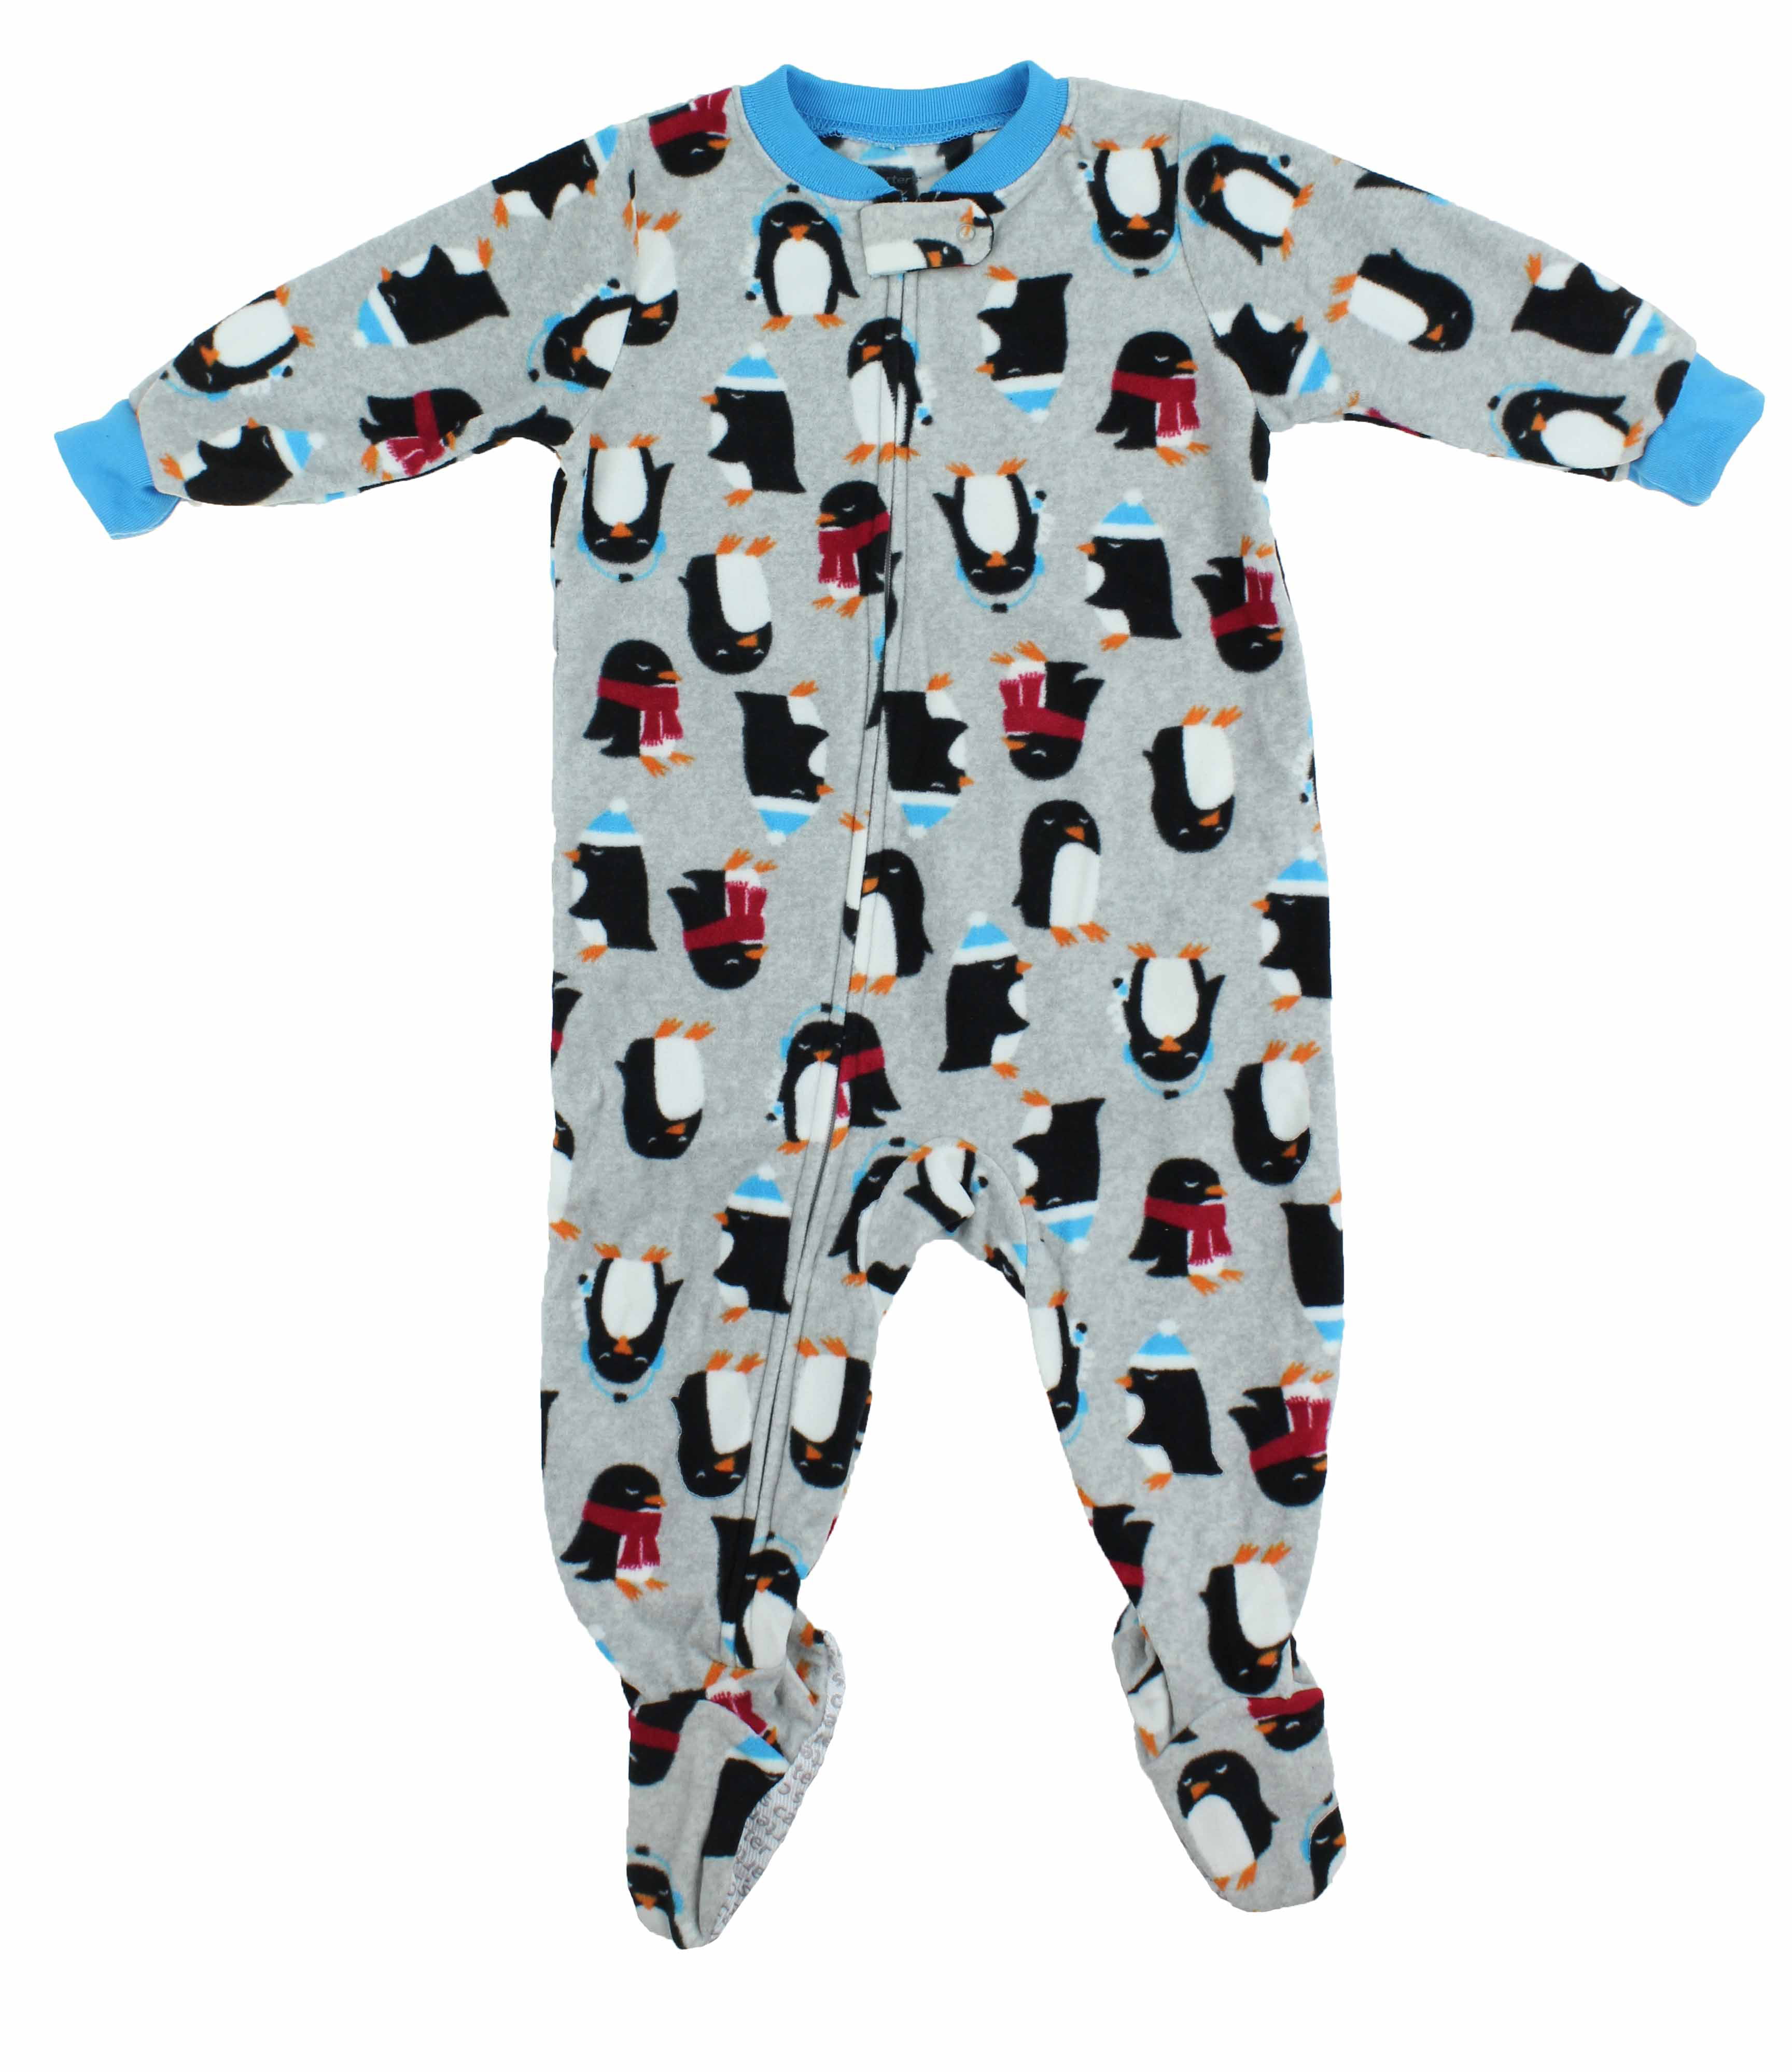 Details about   NWT CARTER'S BABY BOY COOL DUDE 1 PC FLEECE PENGUIN FOOTED SLEEPER 3 Months 